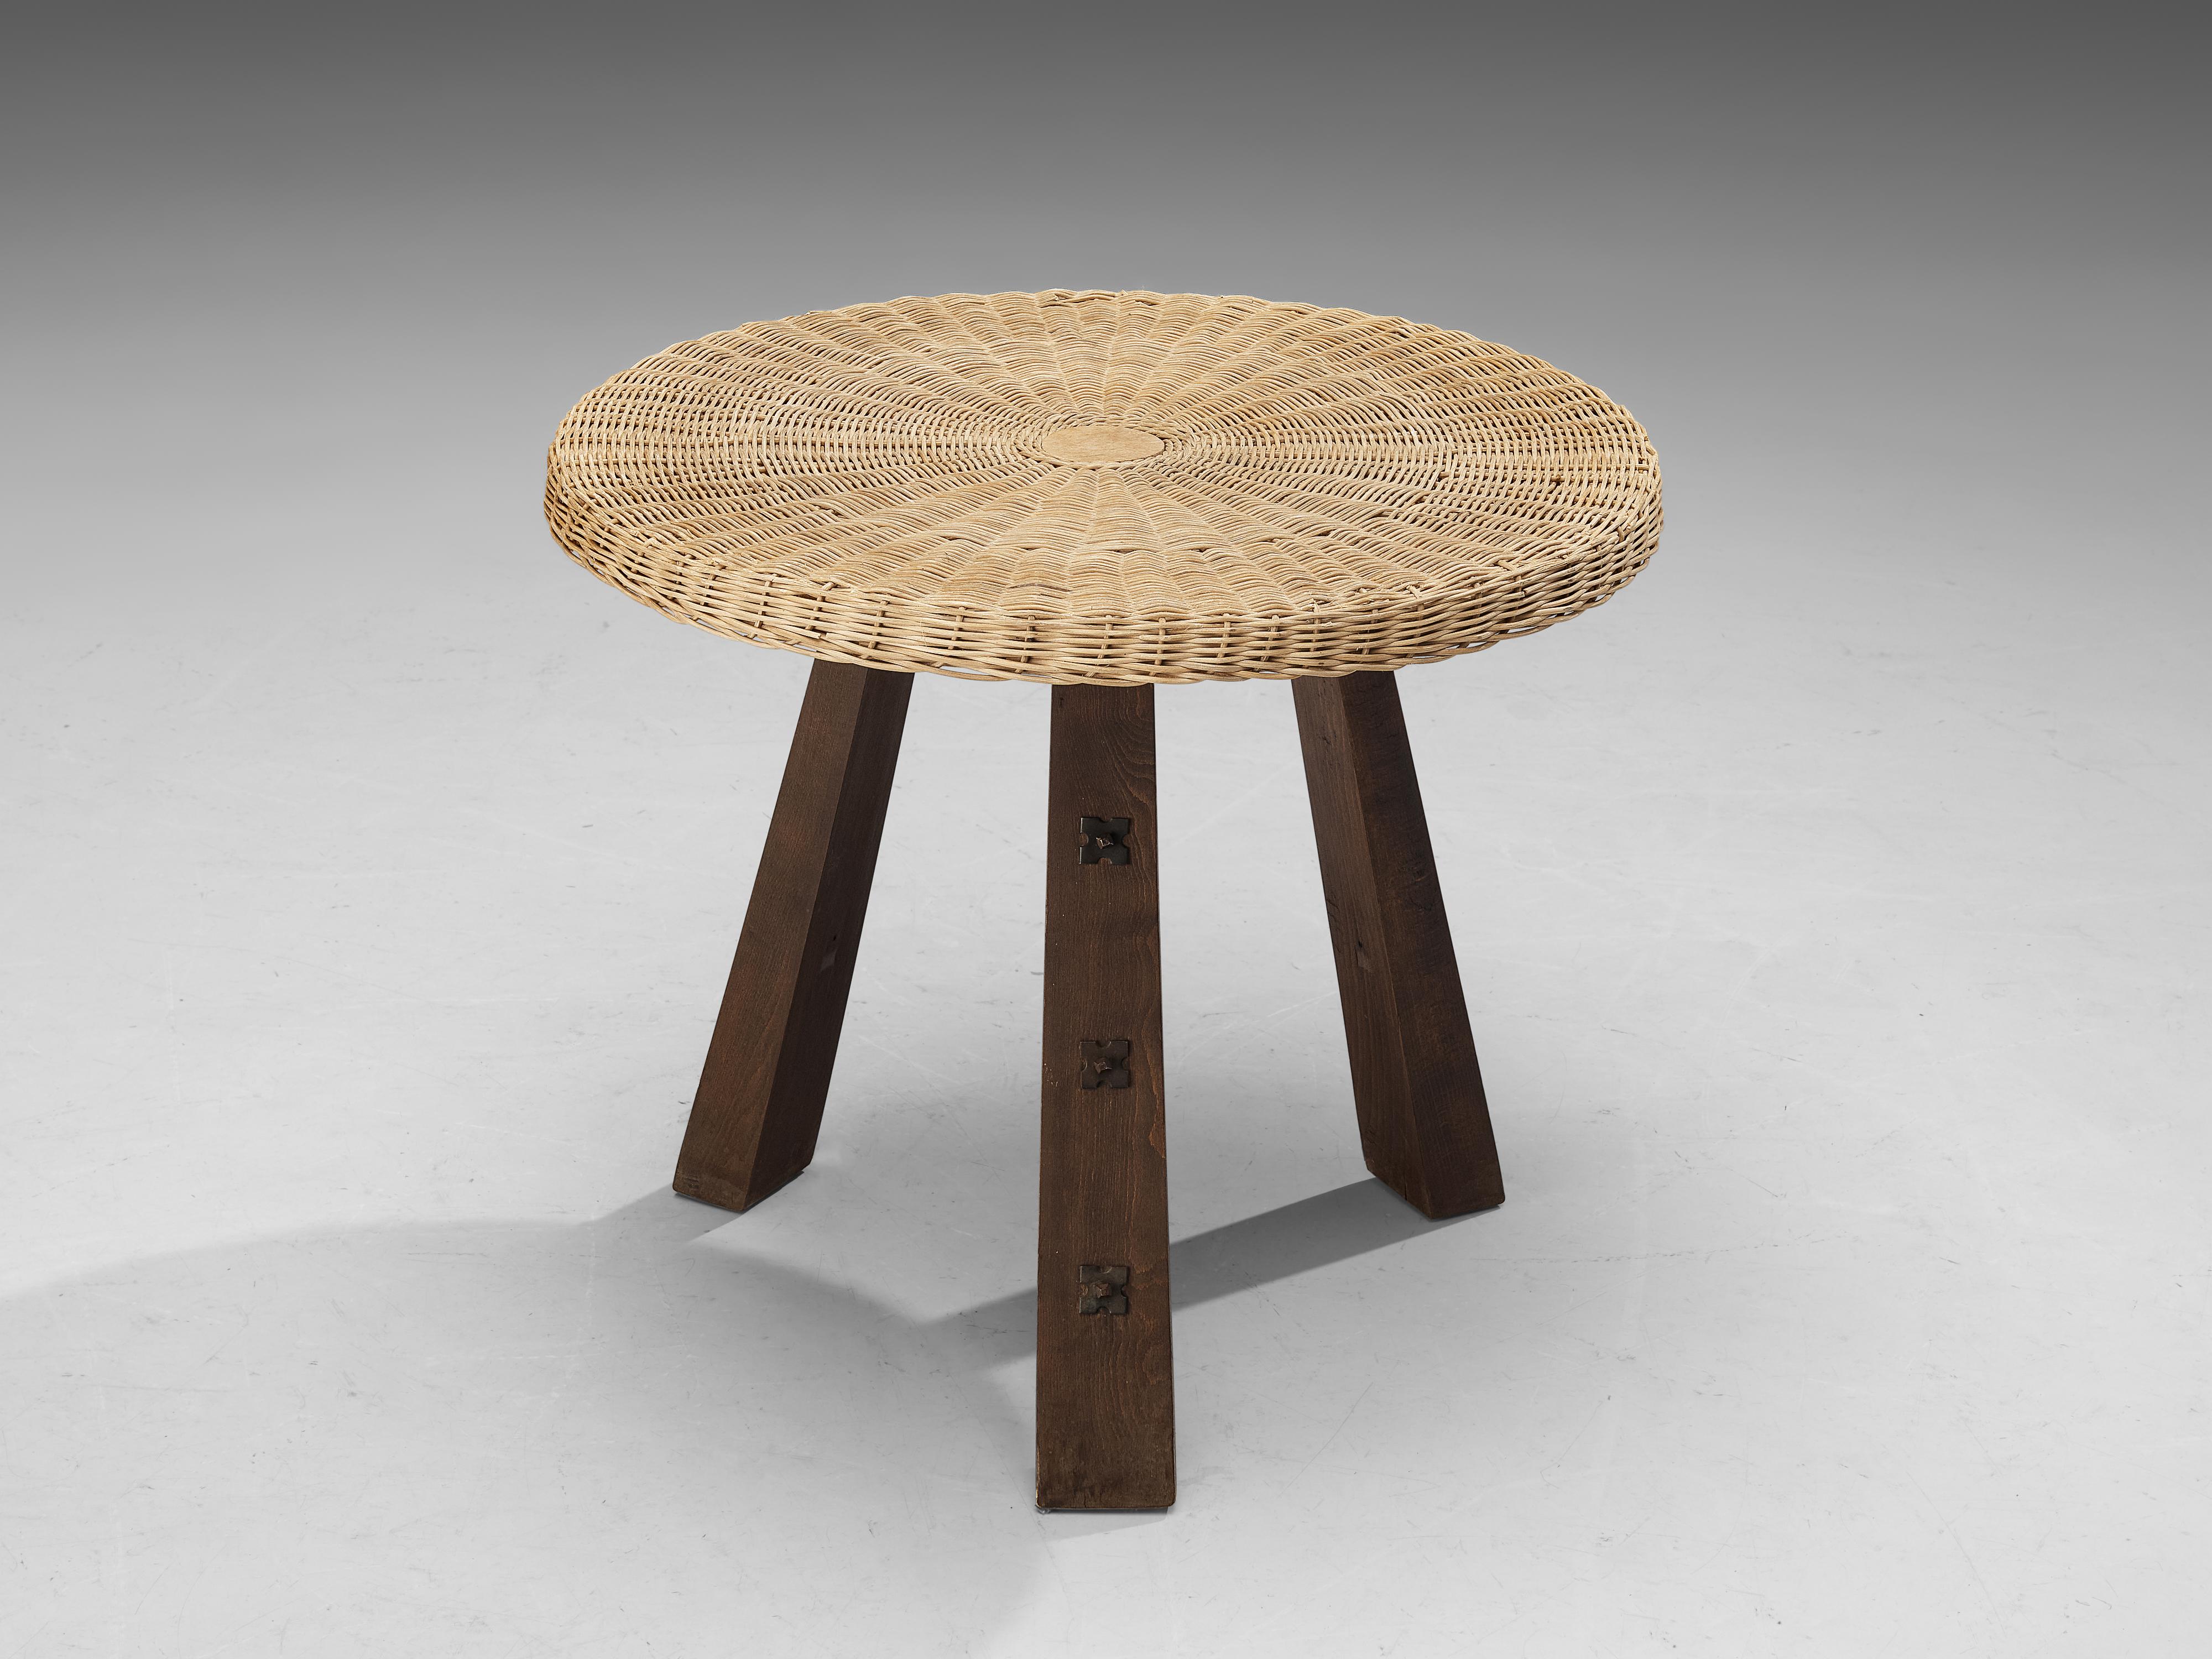 Table, cane wicker, beech, metal, Spain, 1950s

This table holds an intriguing wooden construction aptly defined by sturdy formalism. The legs are decorated in a refined manner consisting of metal studs, emphasizing the typical Mid-Century Spanish